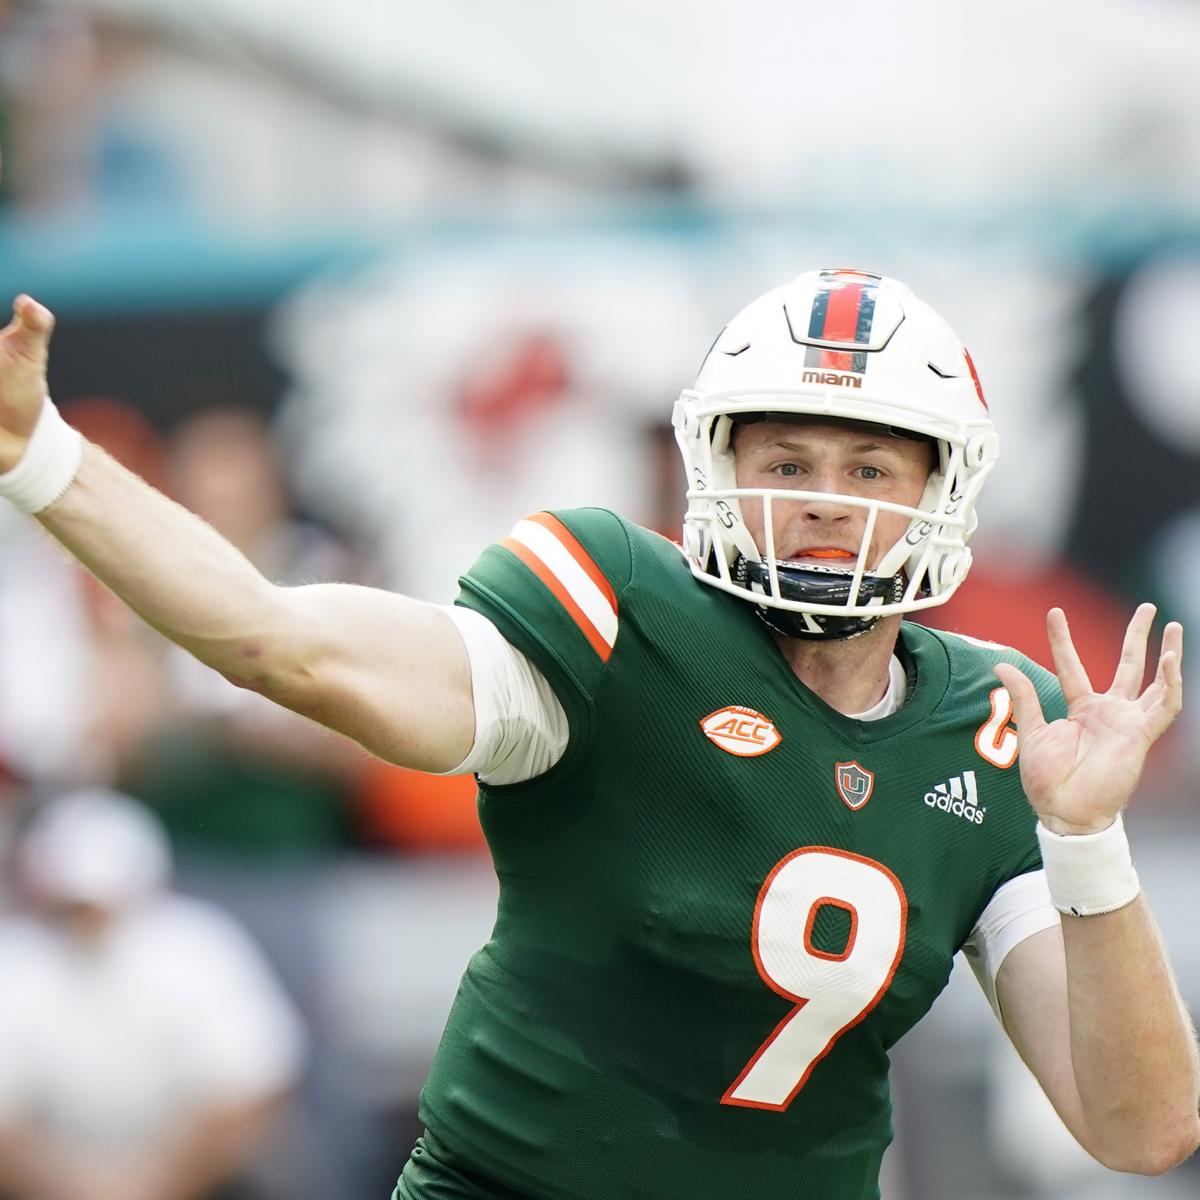 A Way-Too-Early Look at the Potential 2023 NFL Draft QB Class